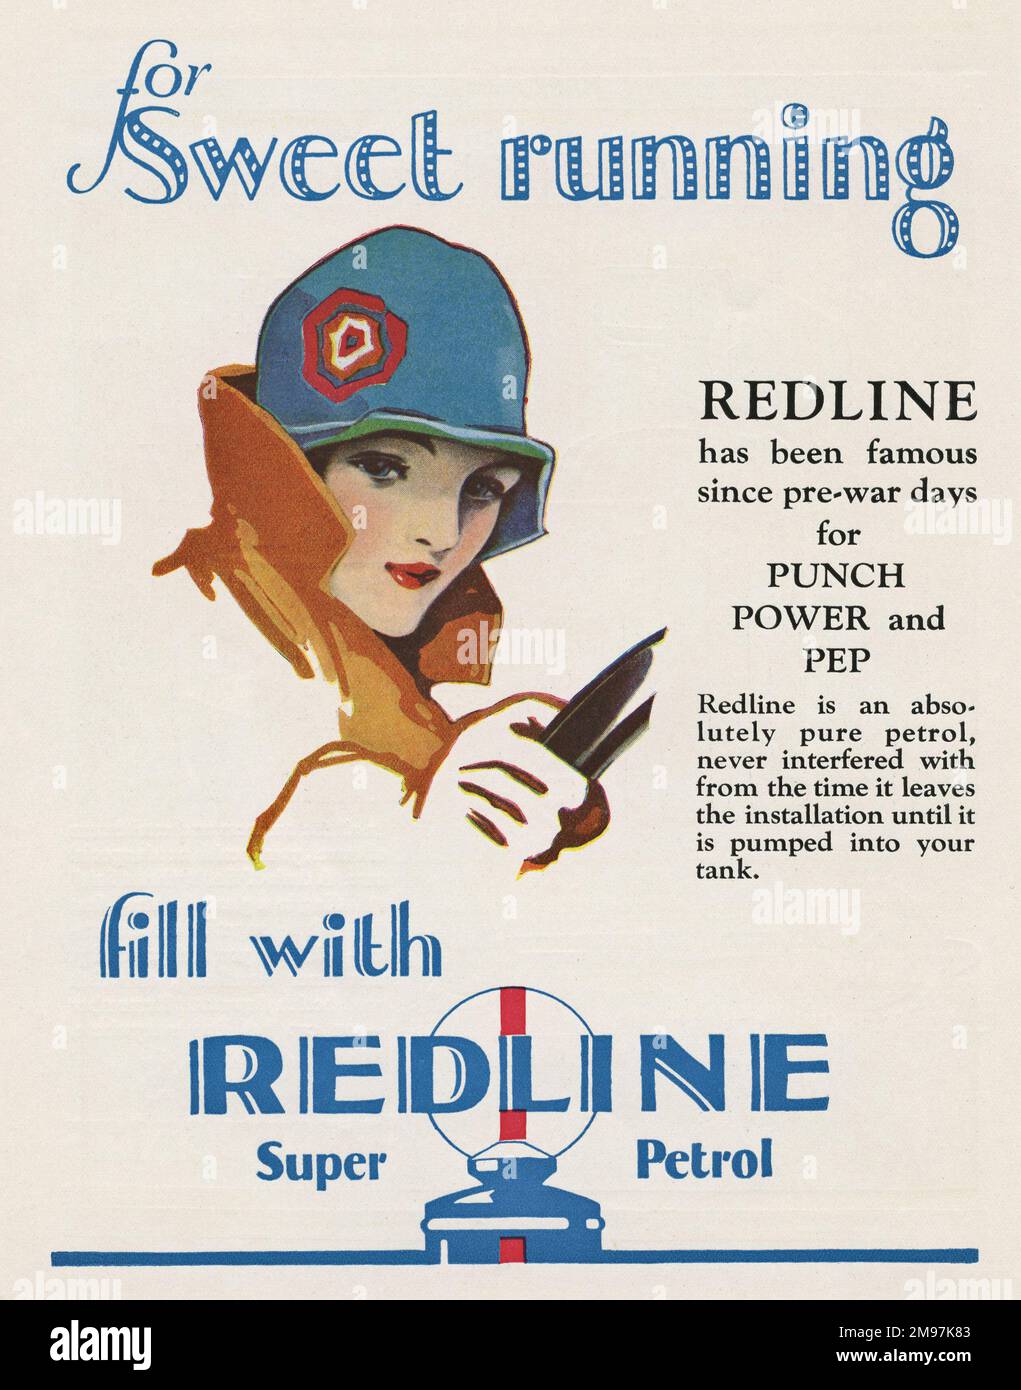 Advertisement for Redline super petrol, famous since pre-war days for punch, power and pep. Stock Photo